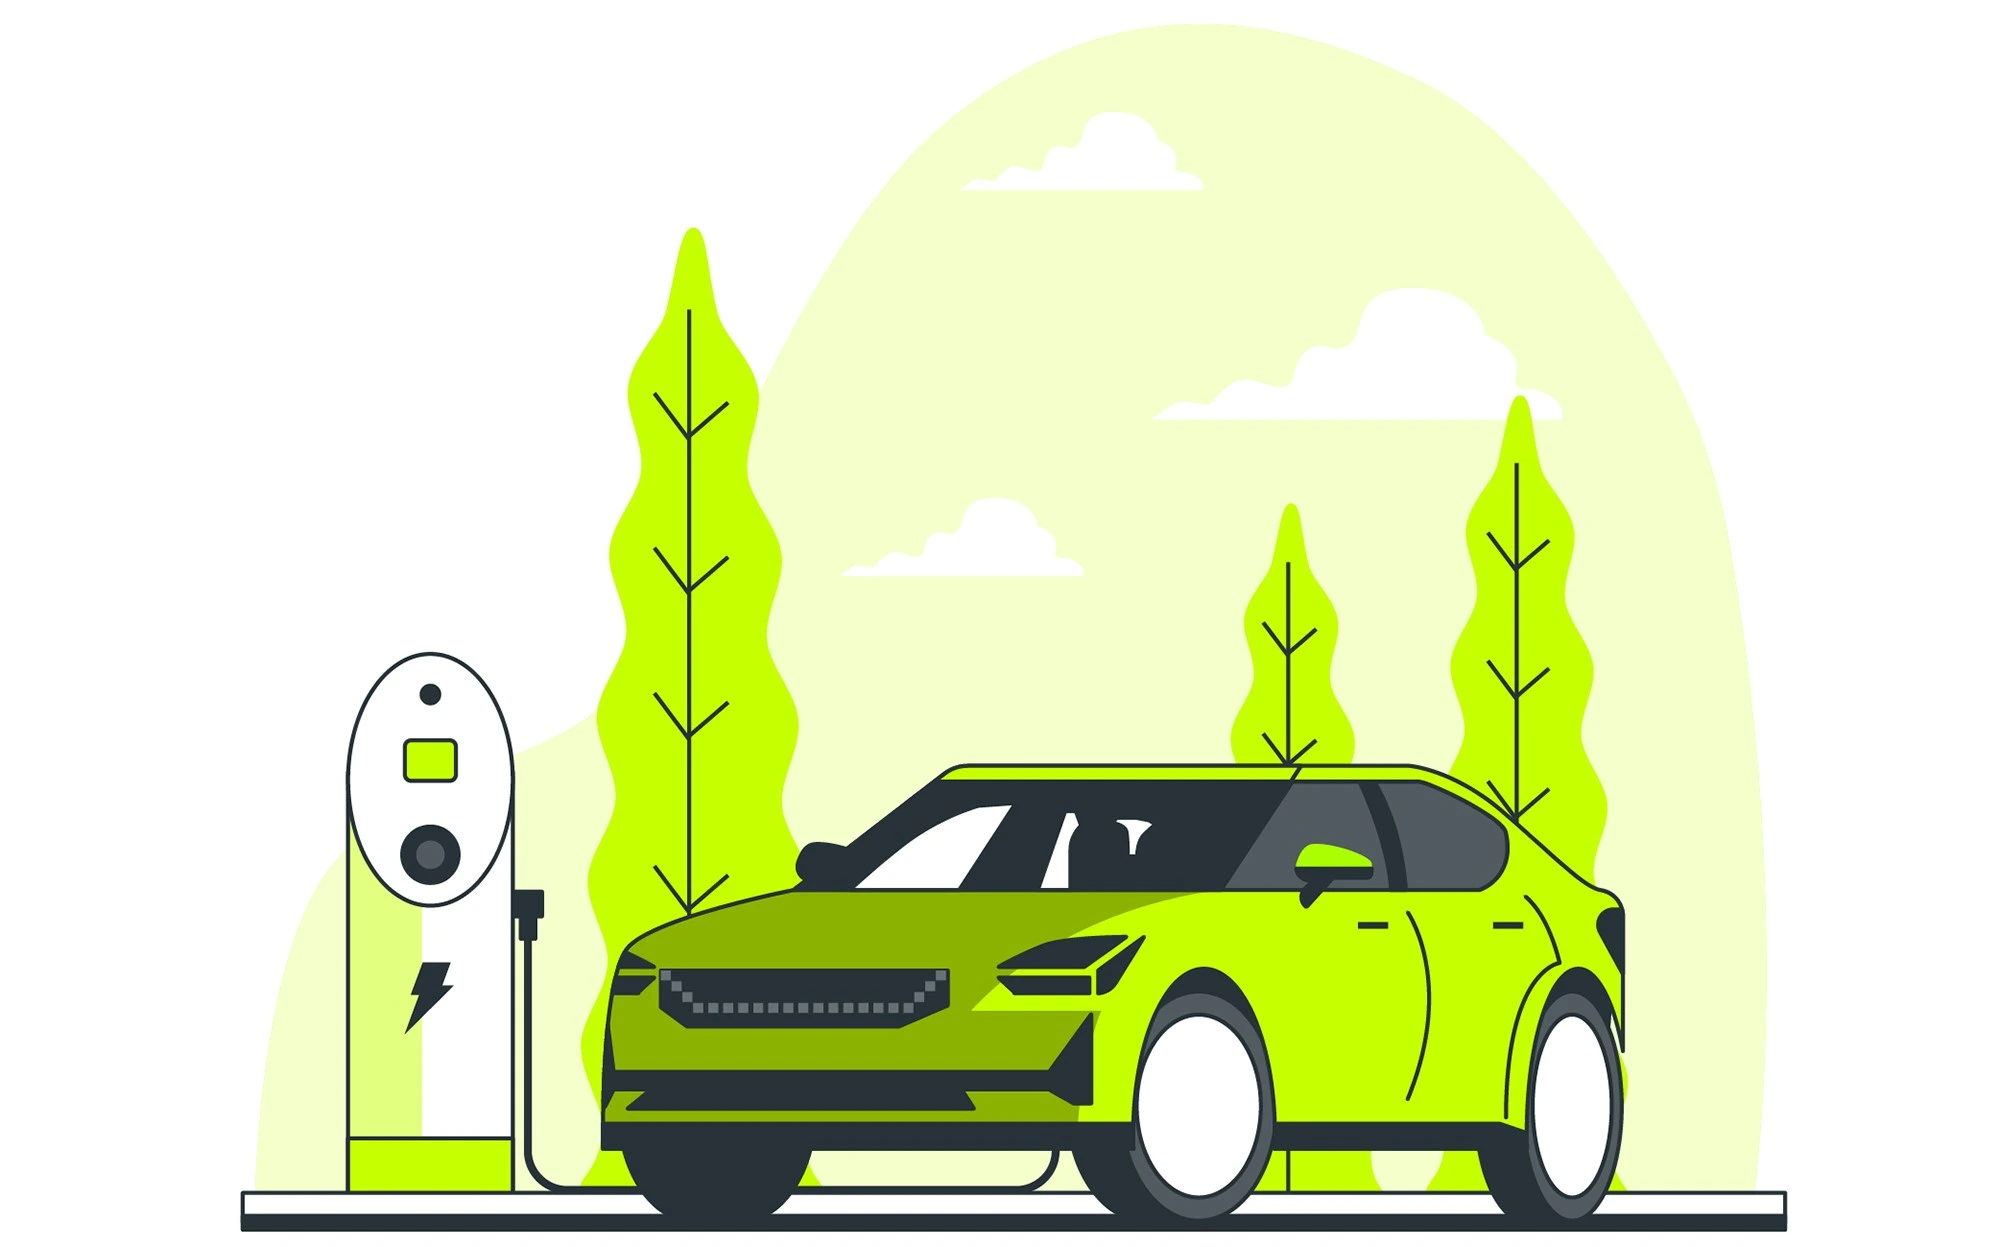 Electric cars: the future or is there a better fuel source?